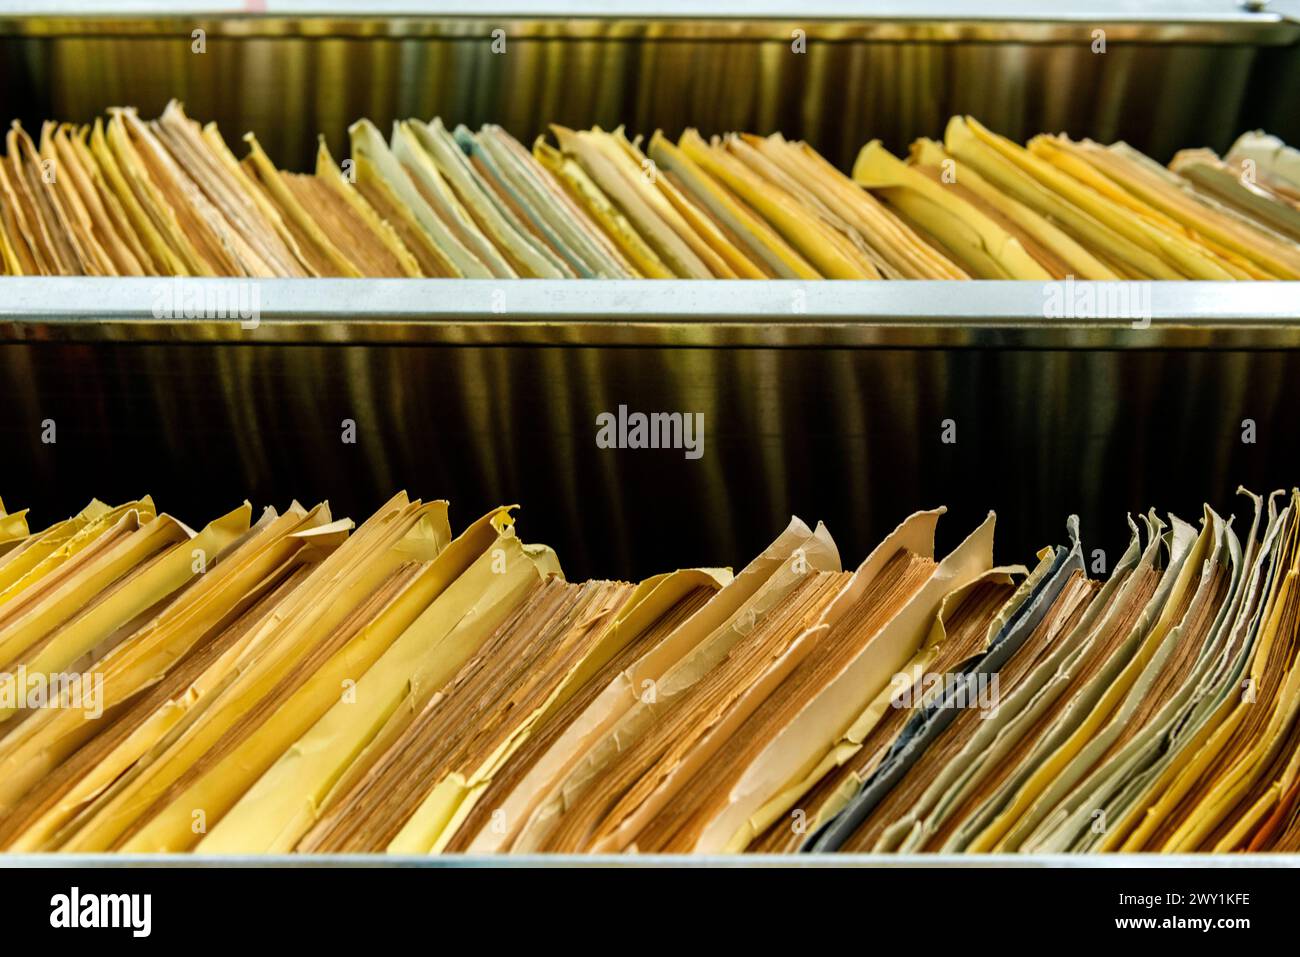 Stasi Archives: Files and Folders in Huge Storage Space The Federal Organisation: BStU is responsible for storing, restoring and accesing the Archives of the former MfS / East-German Stasi Intelligence Service. In huge rooms approximately 111 Kilometers of files, folders and documents are being stored and researched. Berlin, Germany. Berlin Stasi Archives / Stasi Museum Berlin Germany Copyright: xGuidoxKoppesx Stock Photo